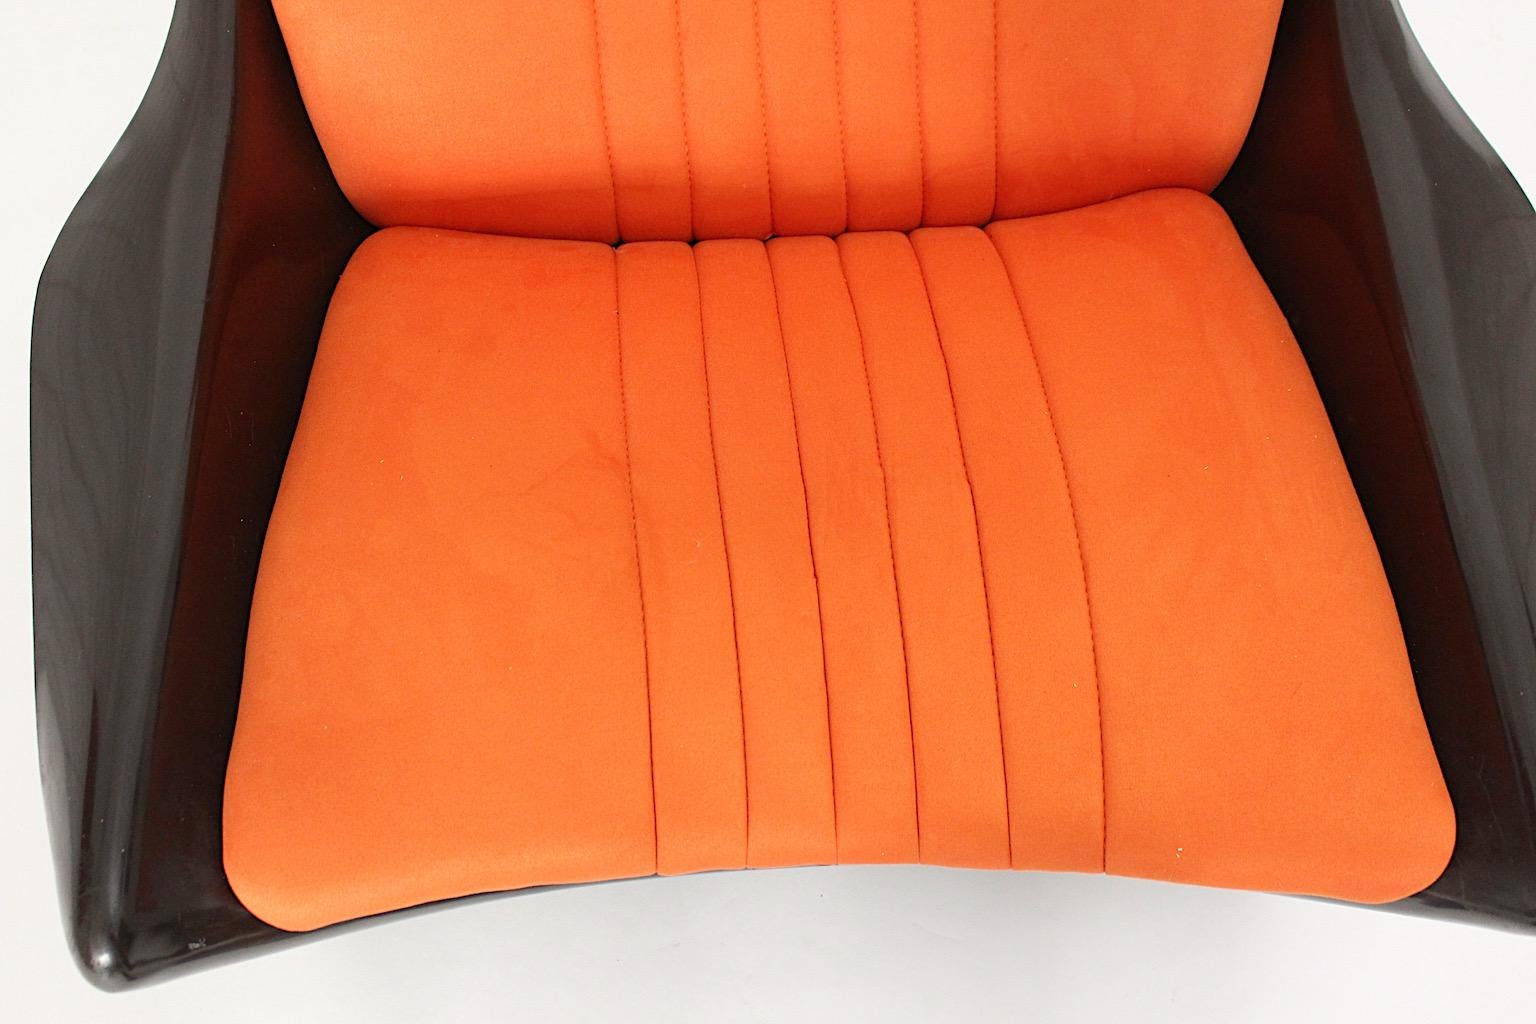 Space Age Vintage Brown Orange Plastic Lounge Chair Steen Ostergaard 1960s For Sale 5